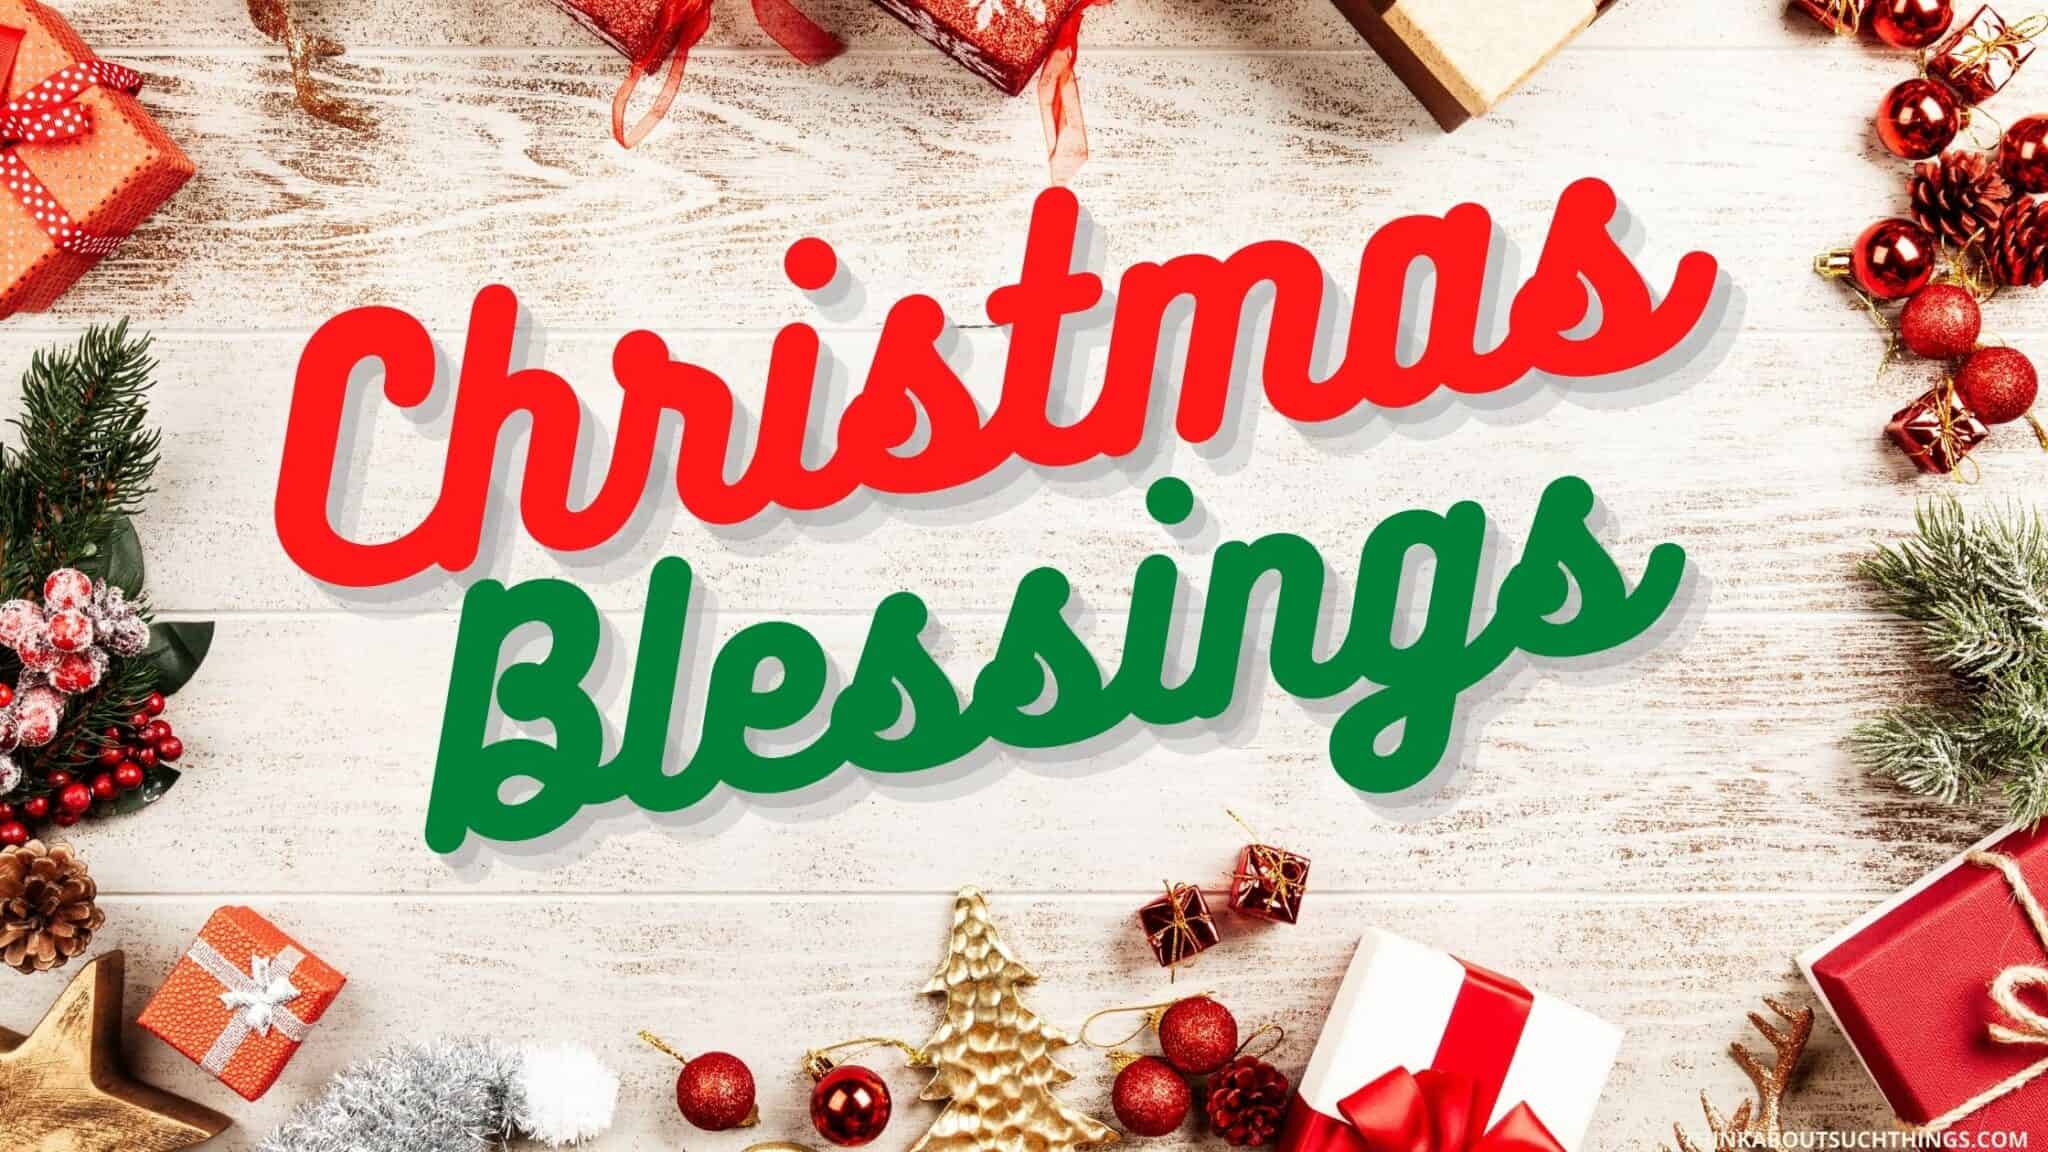 Merry Christmas Images Blessings